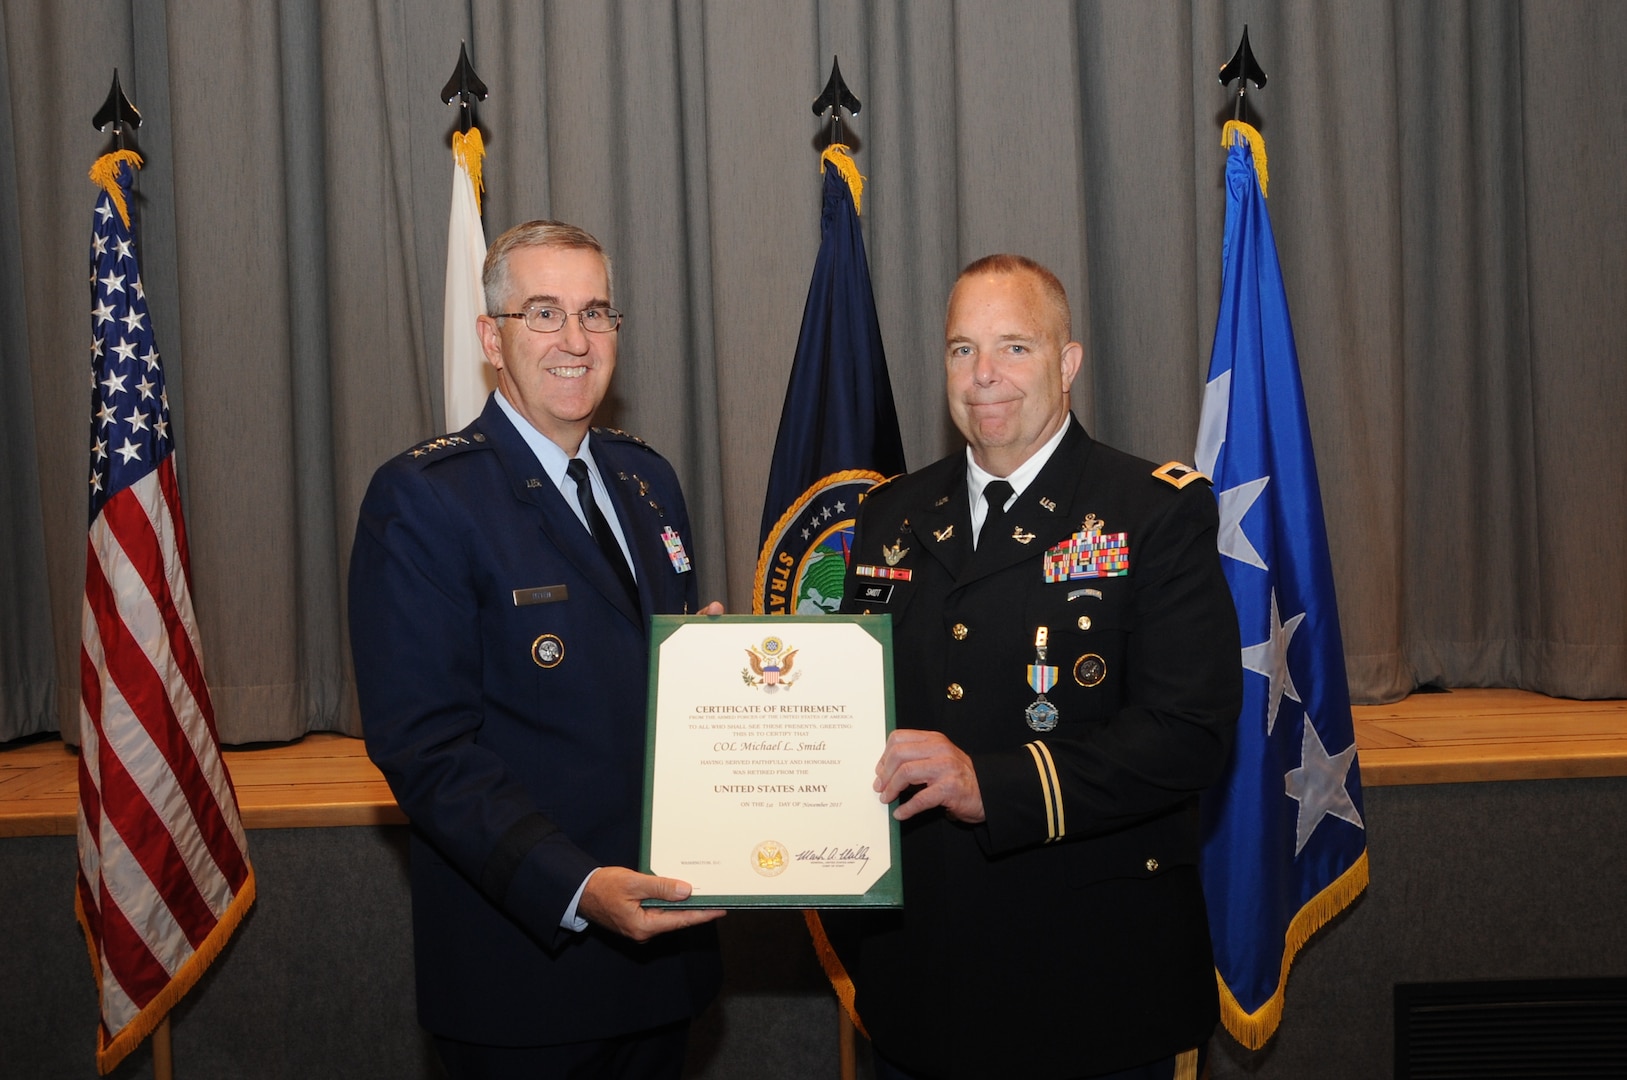 U.S. Army Col. Michael Smidt, U.S. Strategic Command (USSTRATCOM) staff judge advocate, accepts his certificate of retirement from U.S. Air Force Gen. John E. Hyten, commander of USSTRATCOM, during a ceremony at Offutt Air Force Base, Neb., July 7, 2017. Smidt retired from the U.S. Army after 41 years of service. Smidt began his career as an airborne infantryman before serving 10 years in the U.S. Army Reserve as a Green Beret. In addition, he completed various assignments in operational law and military justice; he also served as the staff judge advocate for the 1st Infantry Division and as a professor of international and operational law at the U.S. Army Judge Advocate General’s School prior to his assignment to USSTRATCOM. 